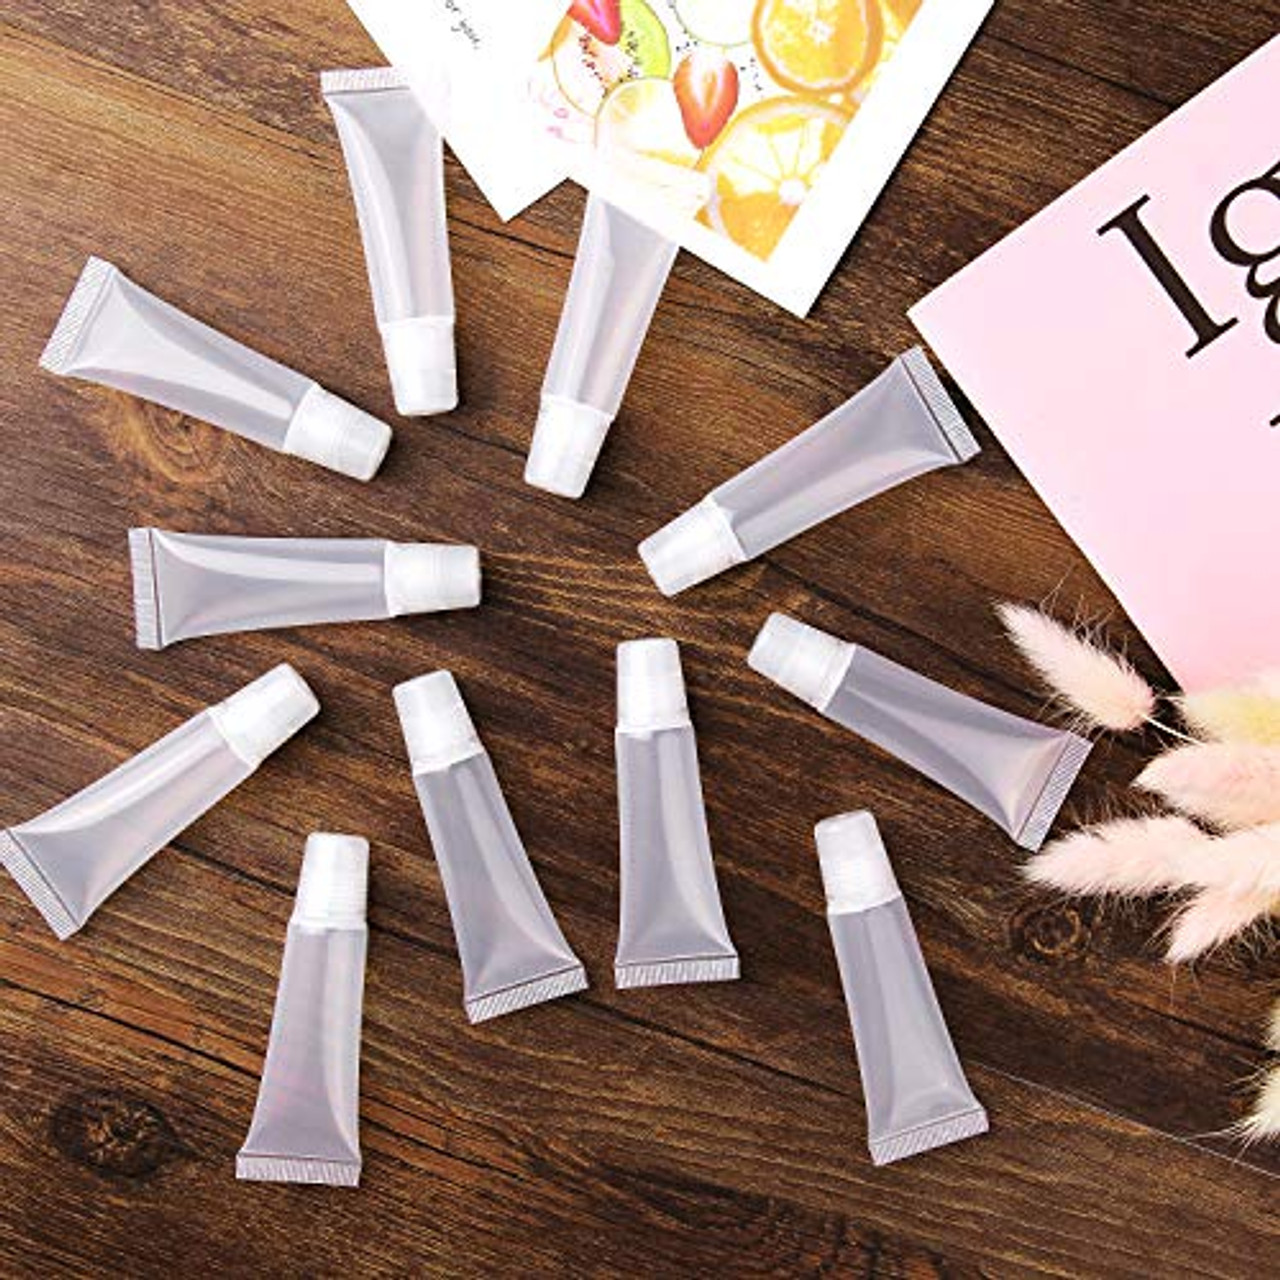 AMORIX 50PCS 10ml Black Lip Gloss Tubes Empty Clear Lip Balm Containers  Refillable Soft Cosmetic Squeeze Tubes for Lip Gloss Base Glitter Pigment  Powder 2 Syringes + Tag Labels Stickers